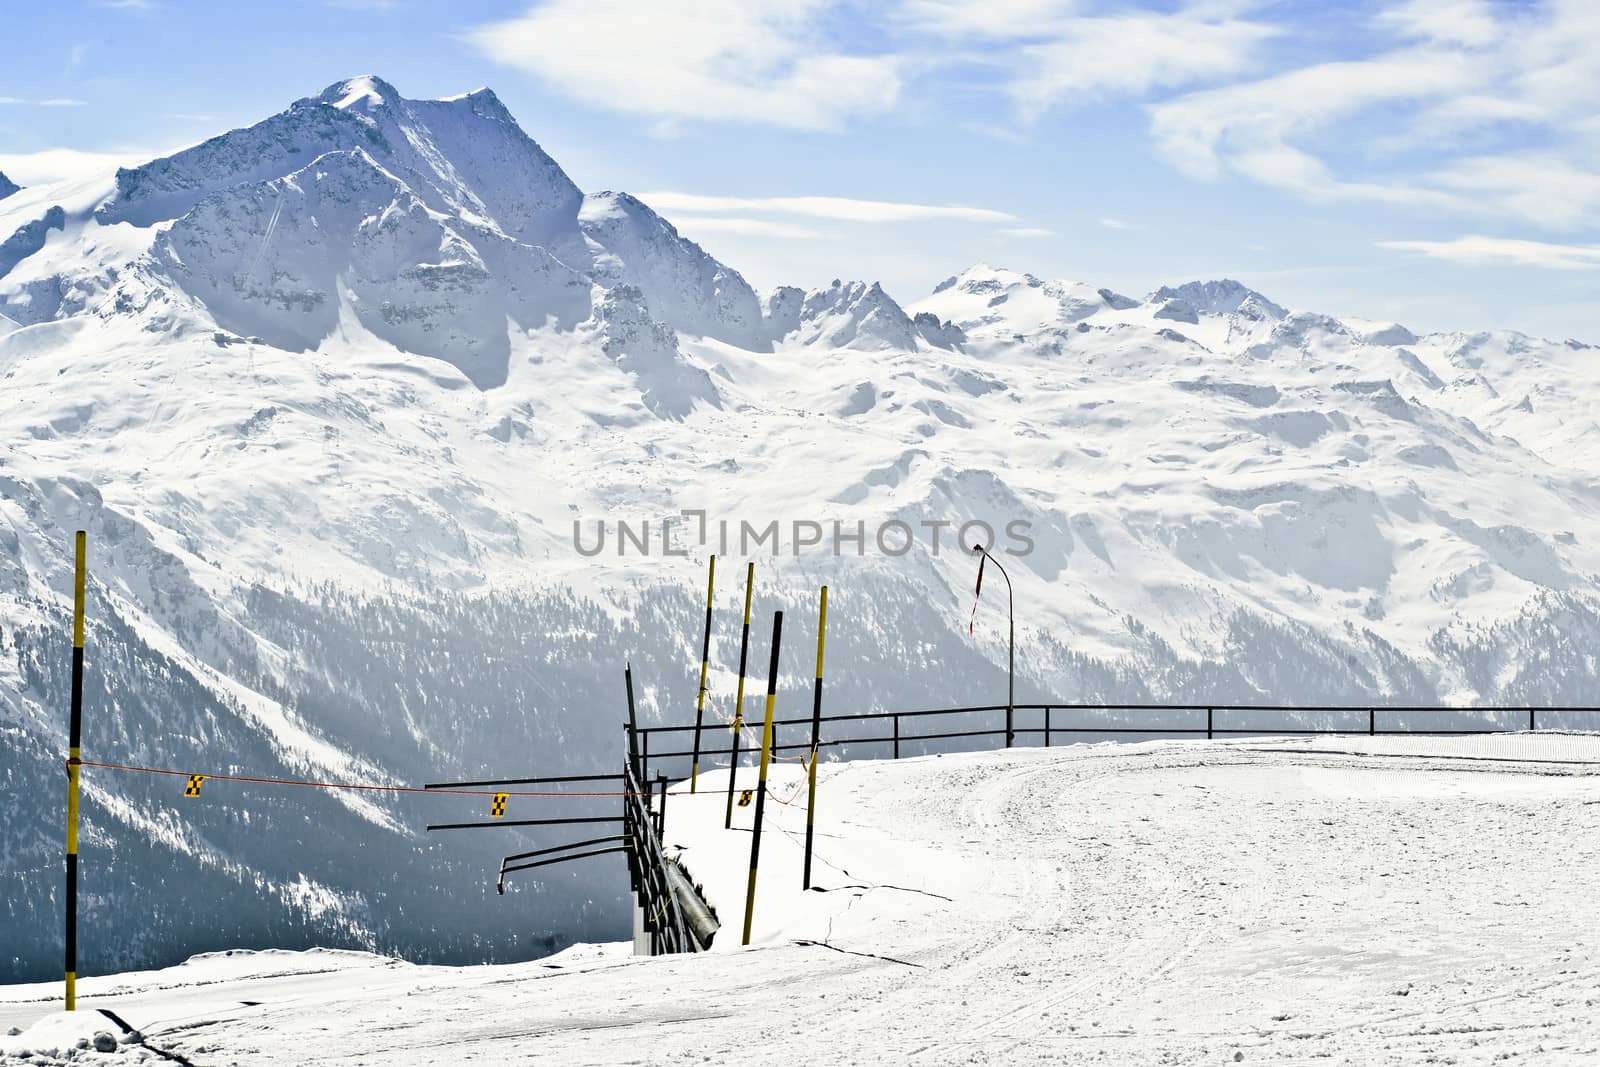 Panoramic view of the swiss Alps by ocusfocus